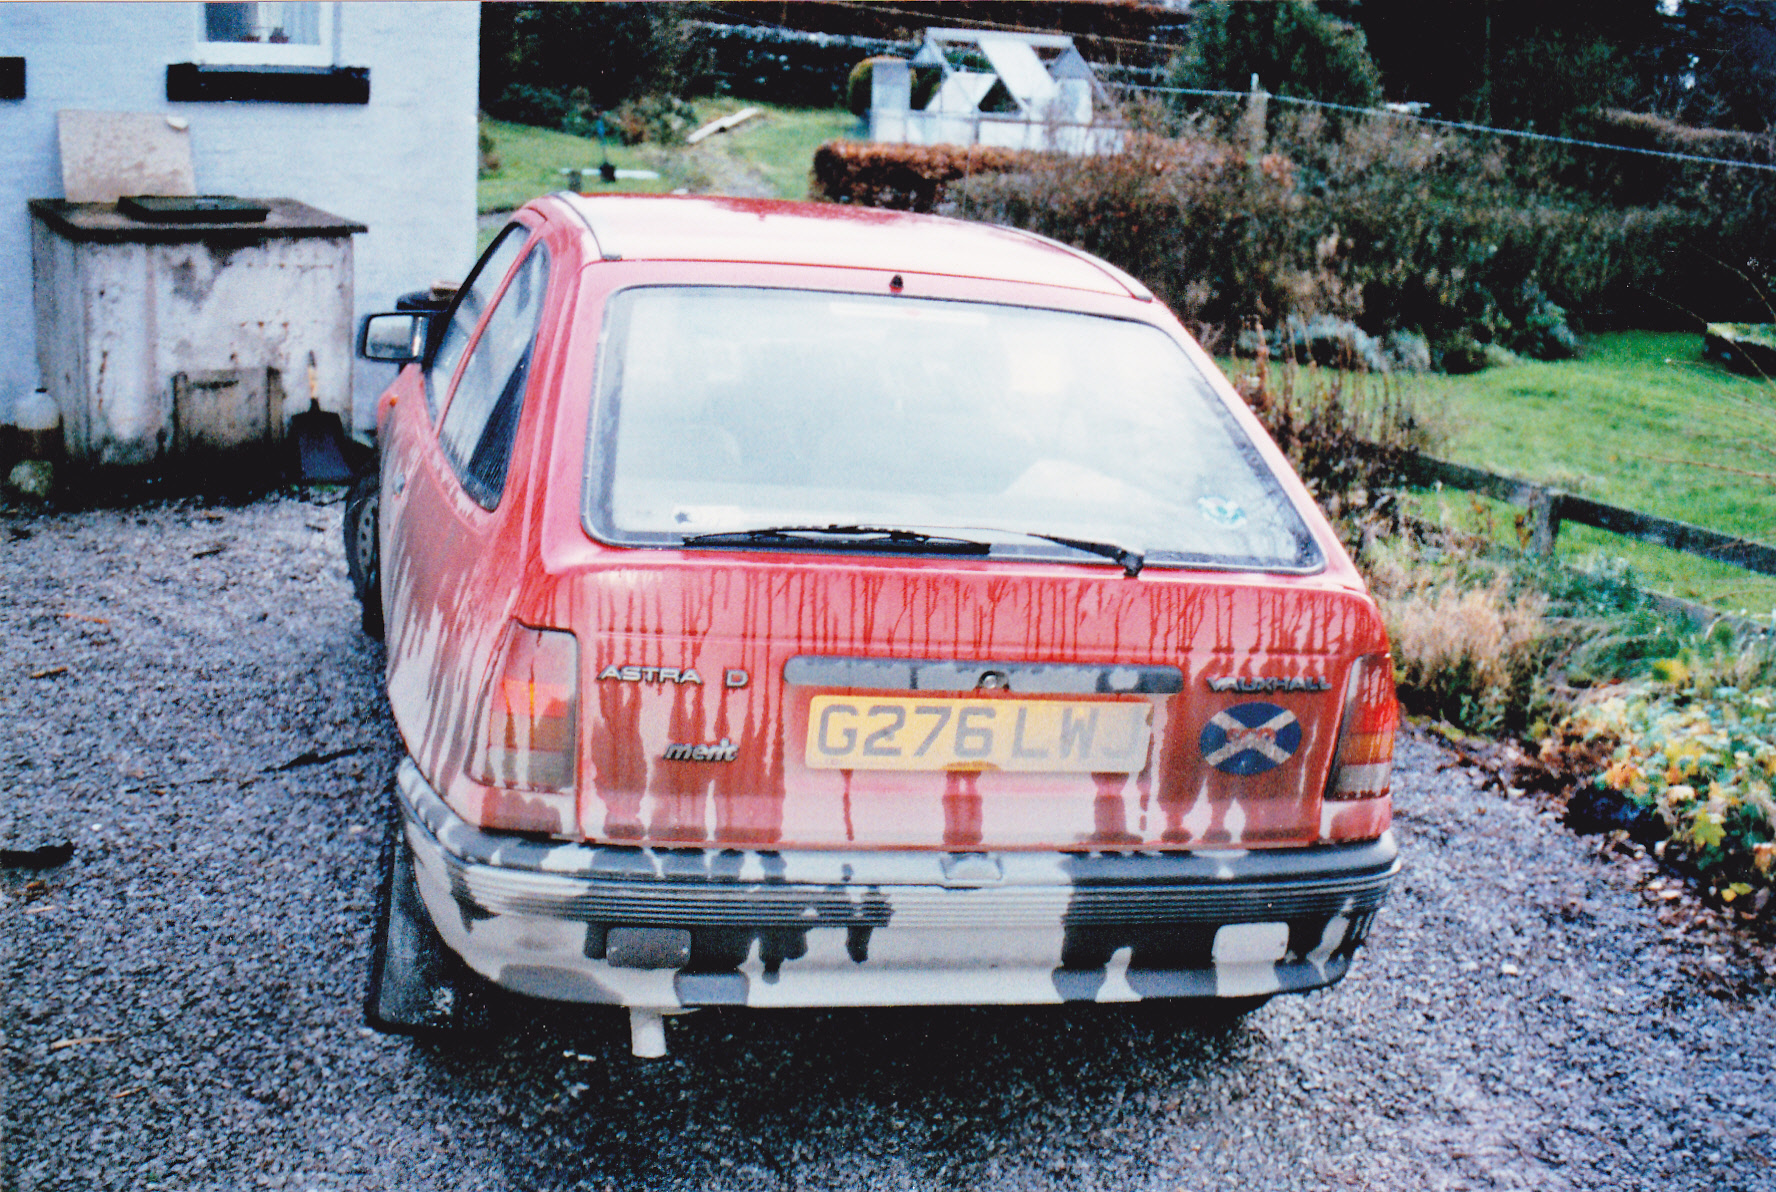 RE: I like 'em dirty: PH Blog - Page 4 - General Gassing - PistonHeads